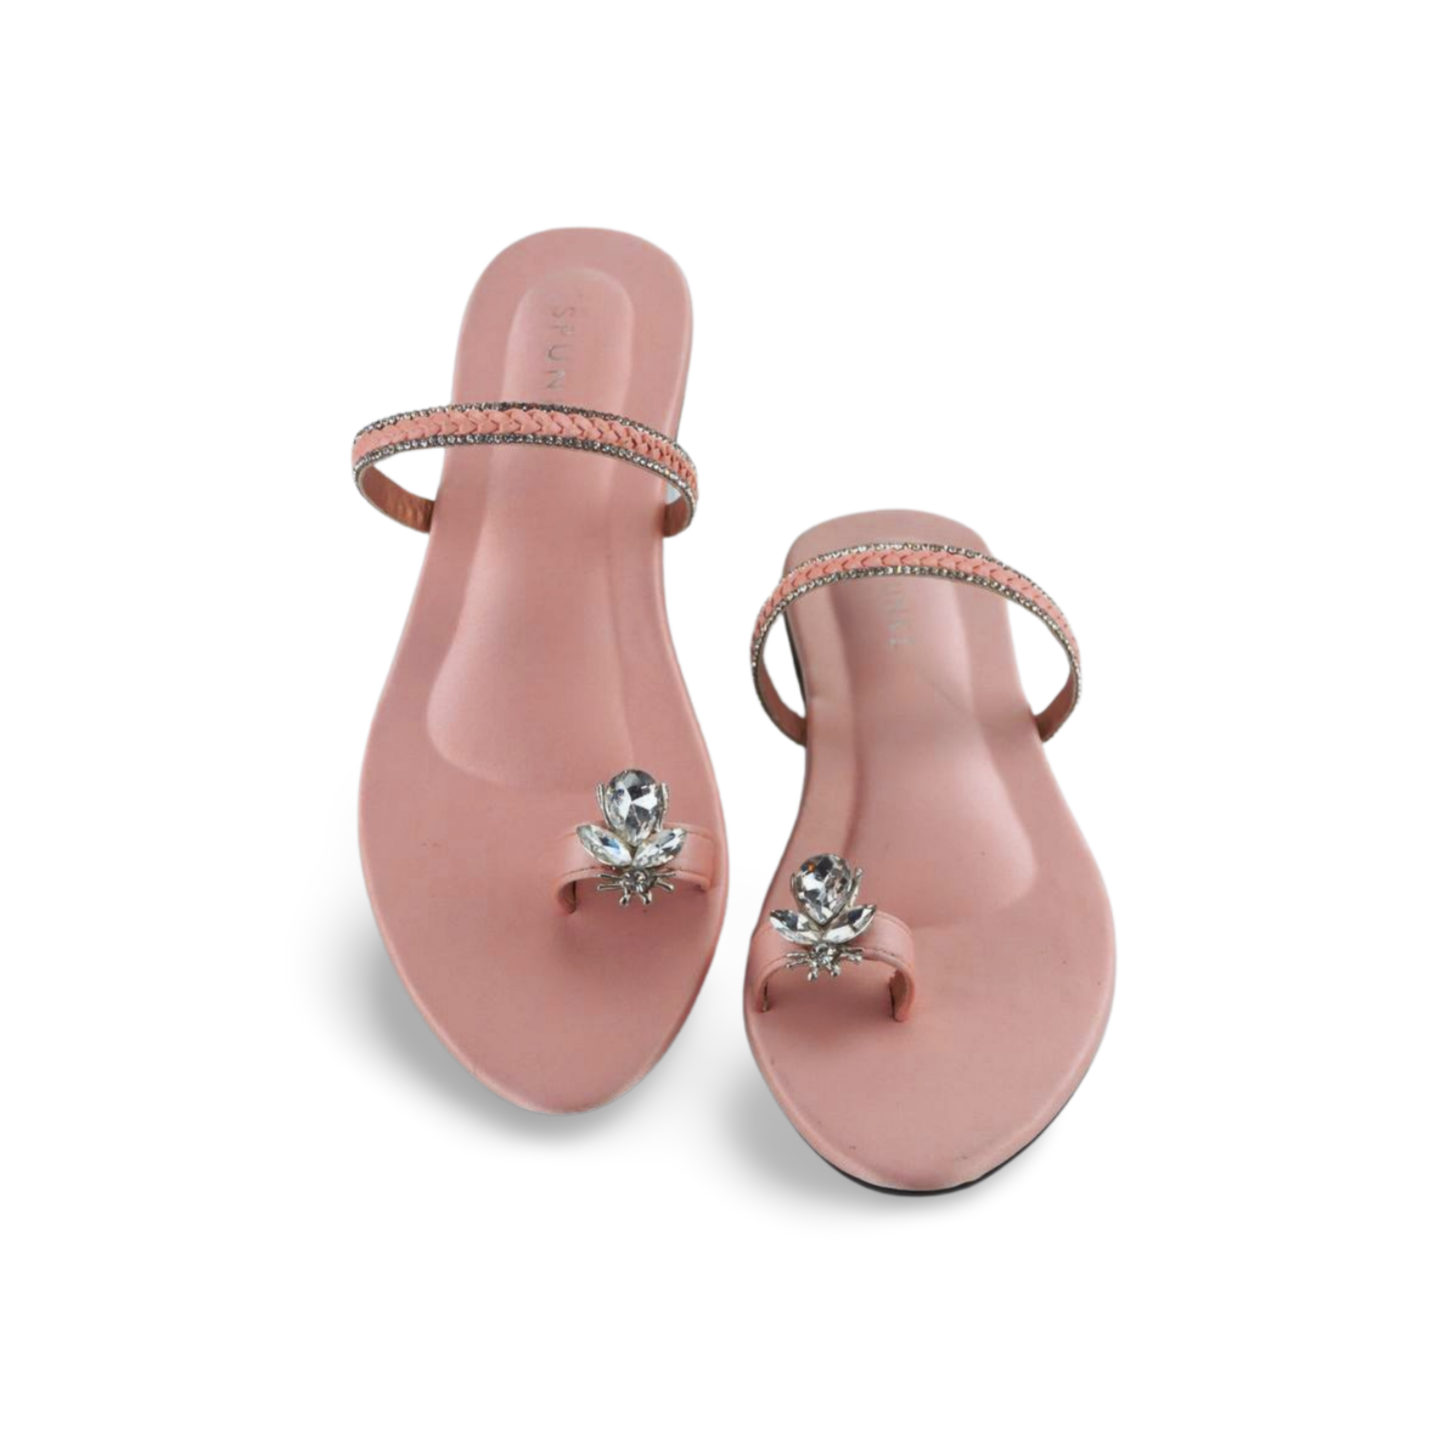 SPUNKZ Flat Sandals with Rhinestone Ankle Strap and Honeybee Buckle on Thumb